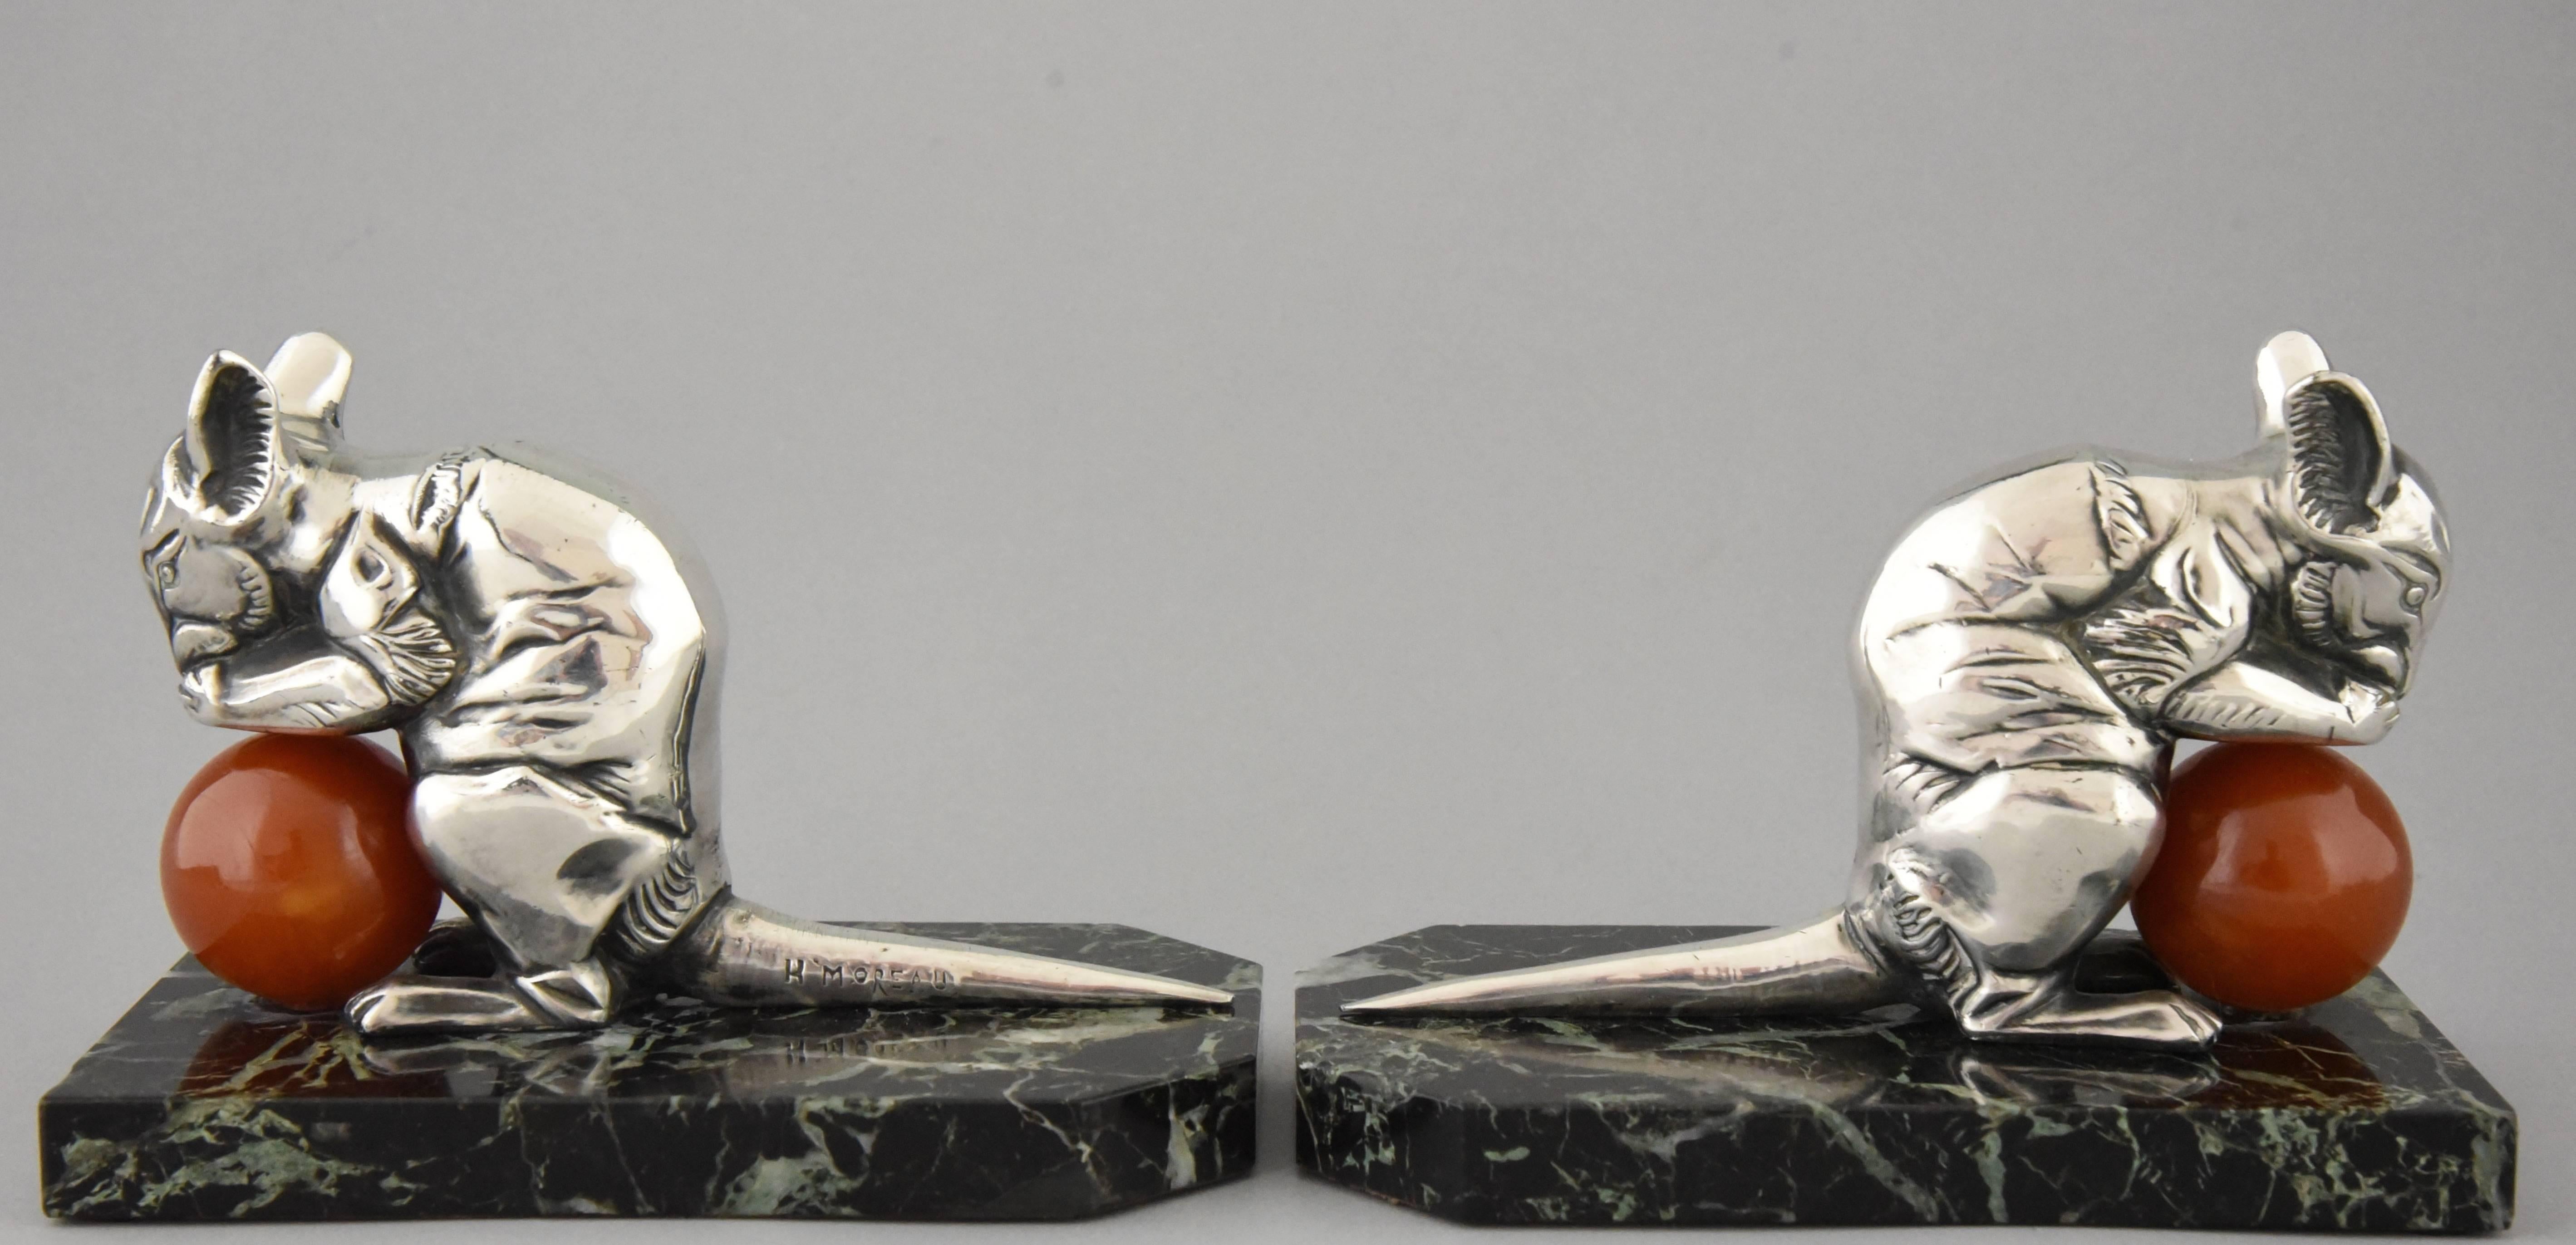 Lovely pair of French Art Deco mouse bookends by Hippolyte Moreau
Signature/ Marks: H. Moreau.
Style: Art Deco.
Date: 1930
Material: Silvered metal. ?Bakelite ball.? Marble base.
Origin: France
Size: H. 10.3 cm. x L. 14 cm. x W. 8.3 cm. ? 
H.